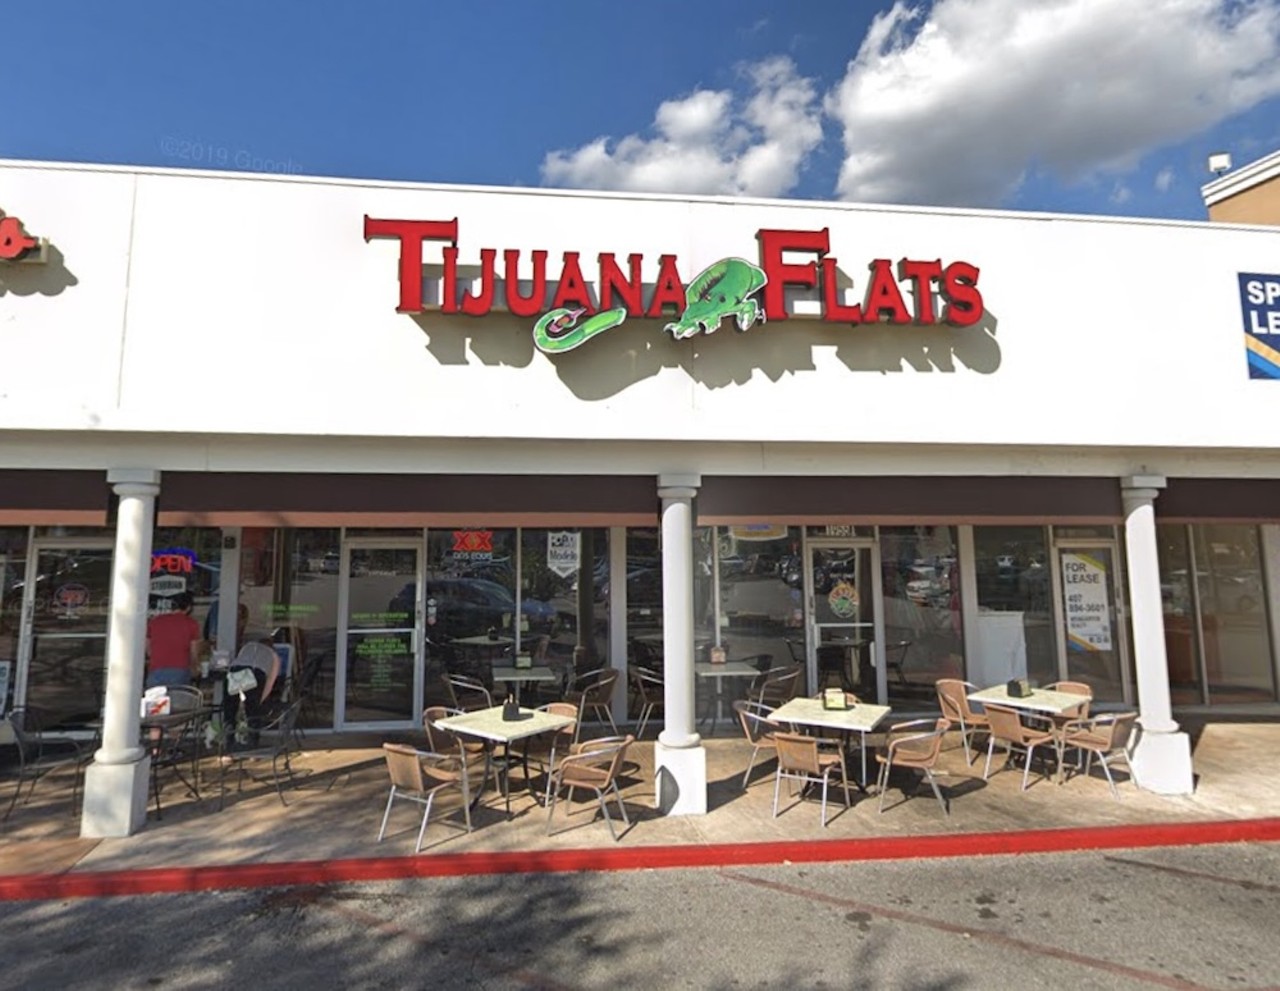 Tijuana Flats
Various locations
Winter Park-based Tex-Mex chain Tijuana Flats filed for Chapter 11 bankruptcy protection and closed 11 of its stores, 10 of which were in Florida and several in Orlando, in April. The chain was founded in 1995 in Winter Park by University of Central Florida alumnus Brian Wheeler, who sold in 2015 after building the restaurant concept into a well-known chain.